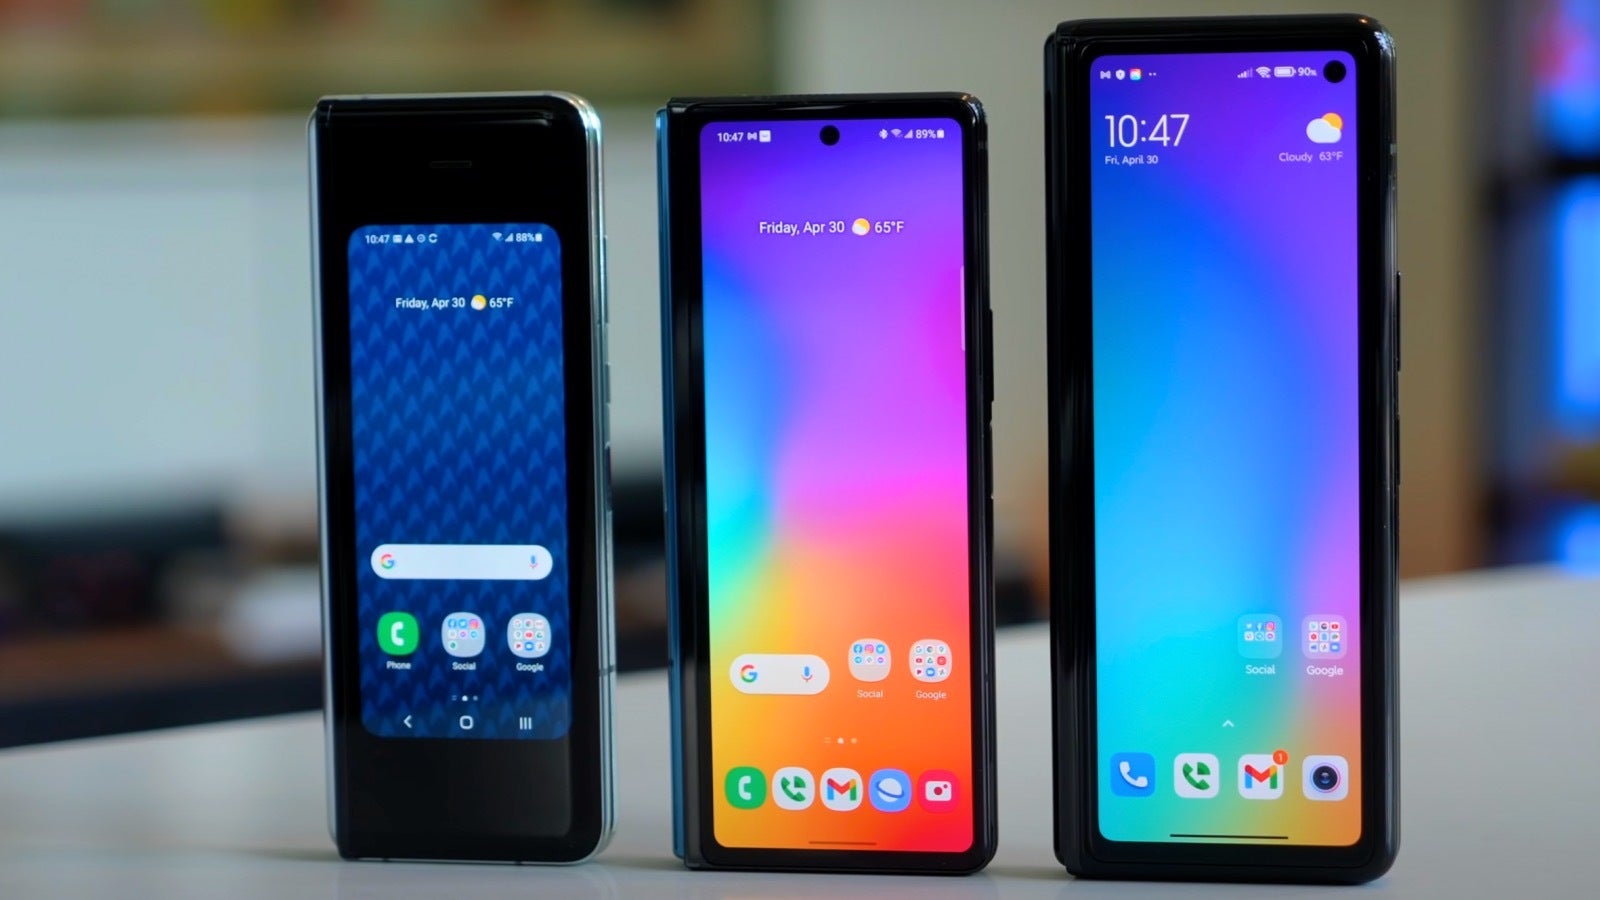 From left to right - Galaxy Fold, Galaxy Z Fold 2, Xiaomi Mix Fold.  Image courtesy of Michael Fisher.  - The "boring"  iPhone won!  Won't buy an Android phone again - unless it can fold in half